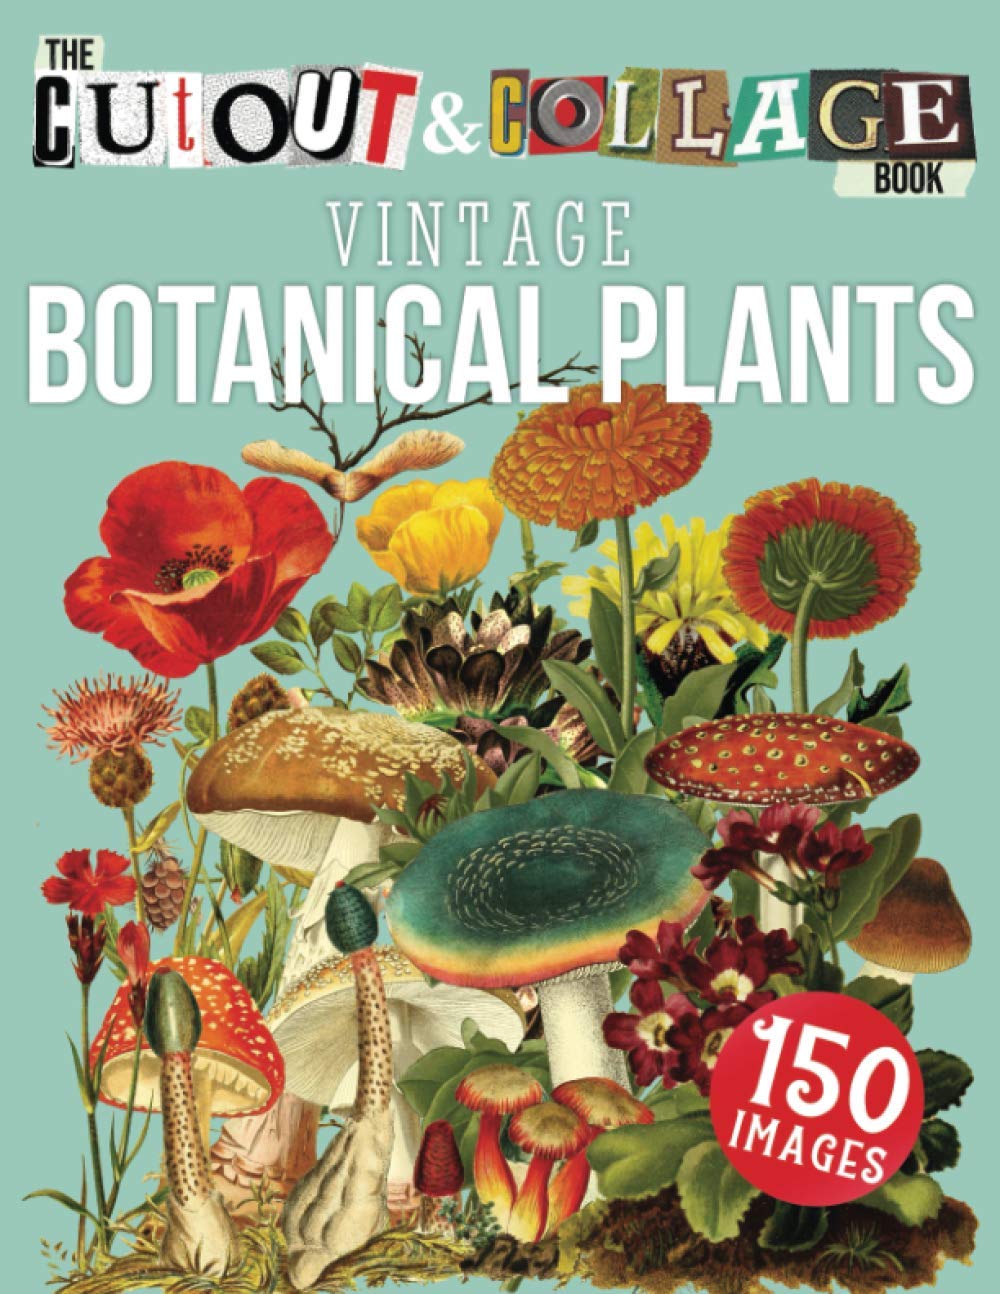 The Cut Out And Collage Book Vintage Botanical Plants: 150 High Quality Vintage Plants Illustrations For Collage and Mixed Media Artists (Cut and Collage Books)